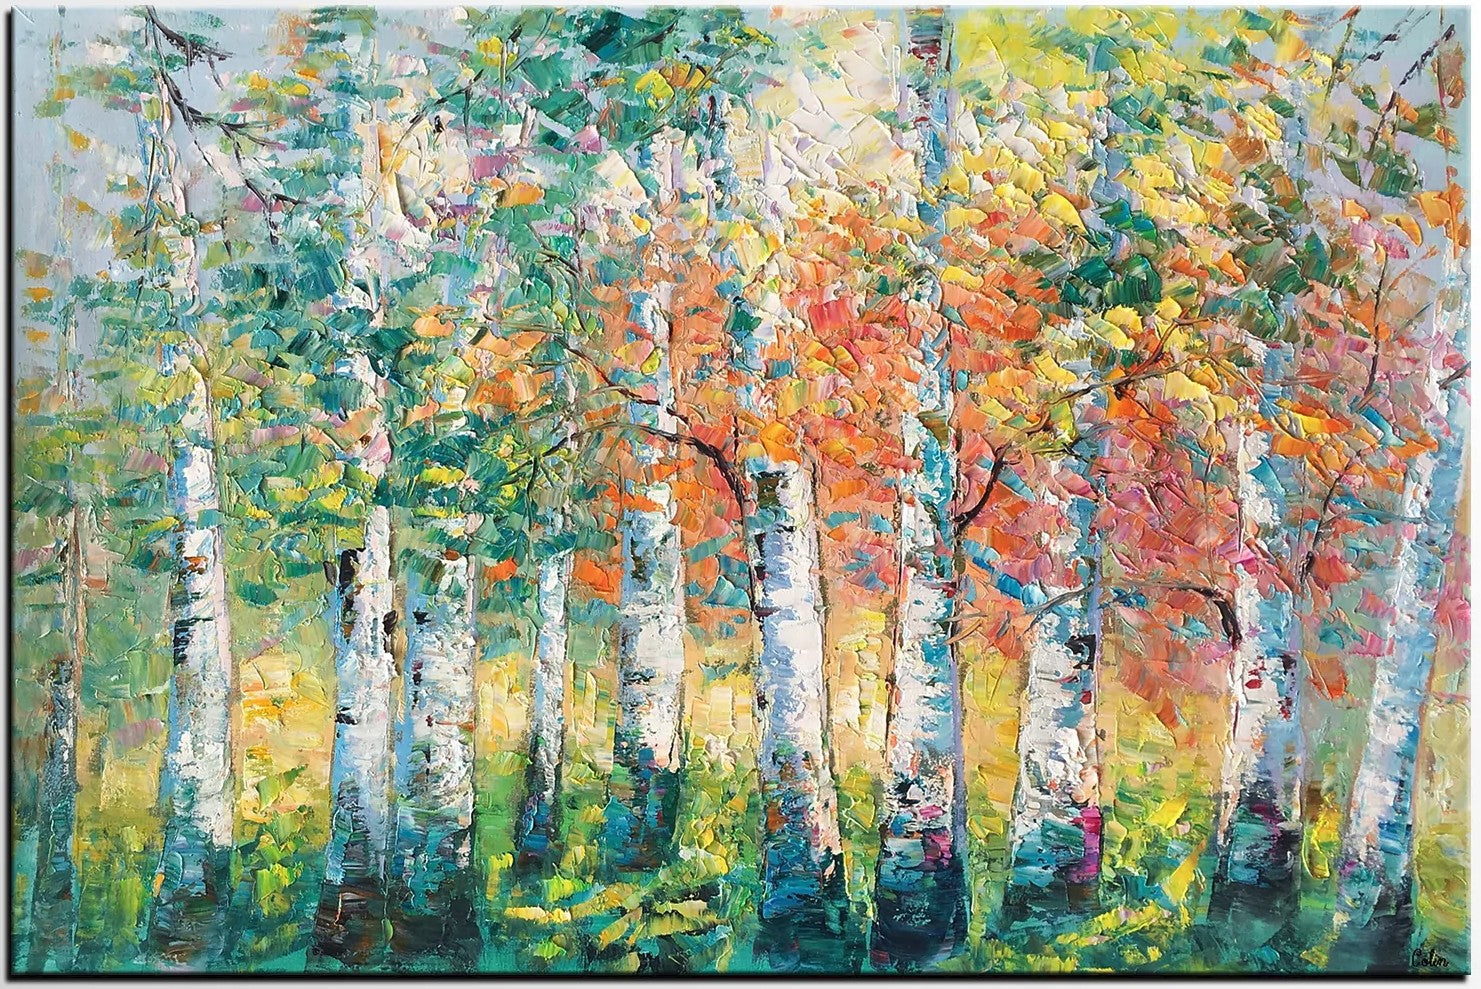 Landscape Oil Paintings, Birch Tree Painting, Large Wall Art Painting, Custom Oil Painting on Canvas, Wall Art Paintings for Sale